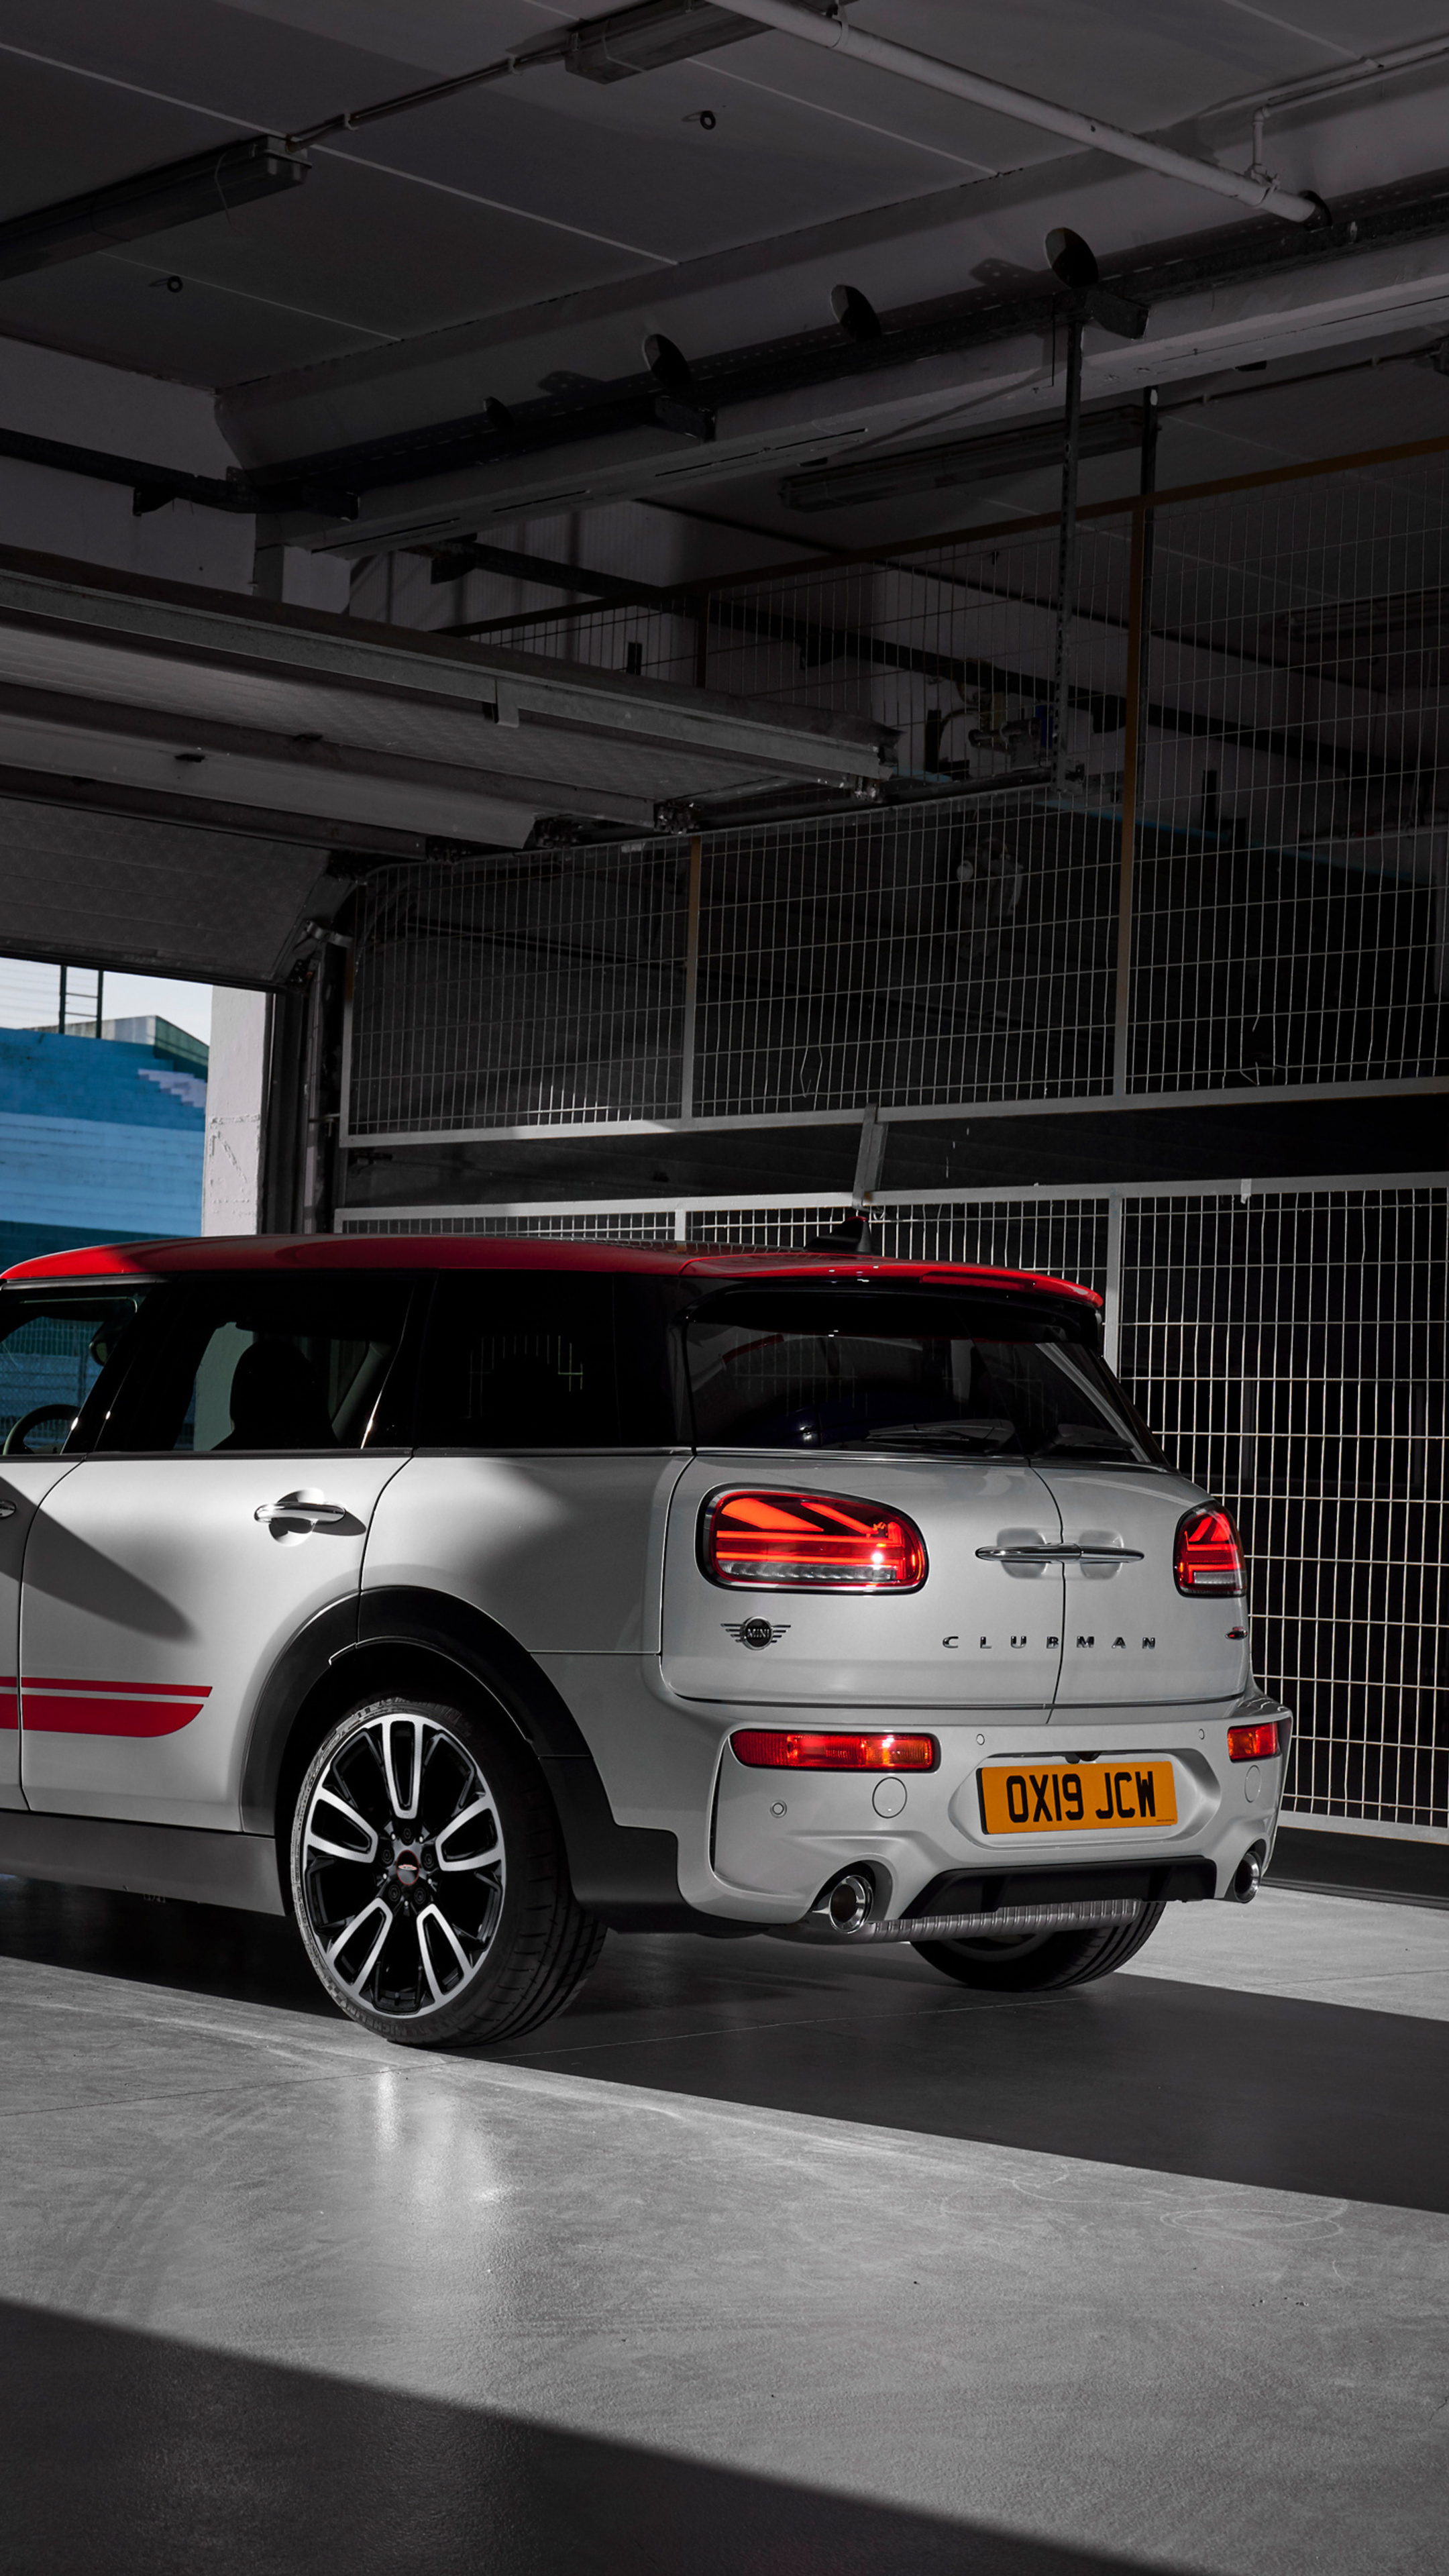 MINI Clubman, Sporty sophistication, Iconic British design, Dynamic driving experience, 2160x3840 4K Phone